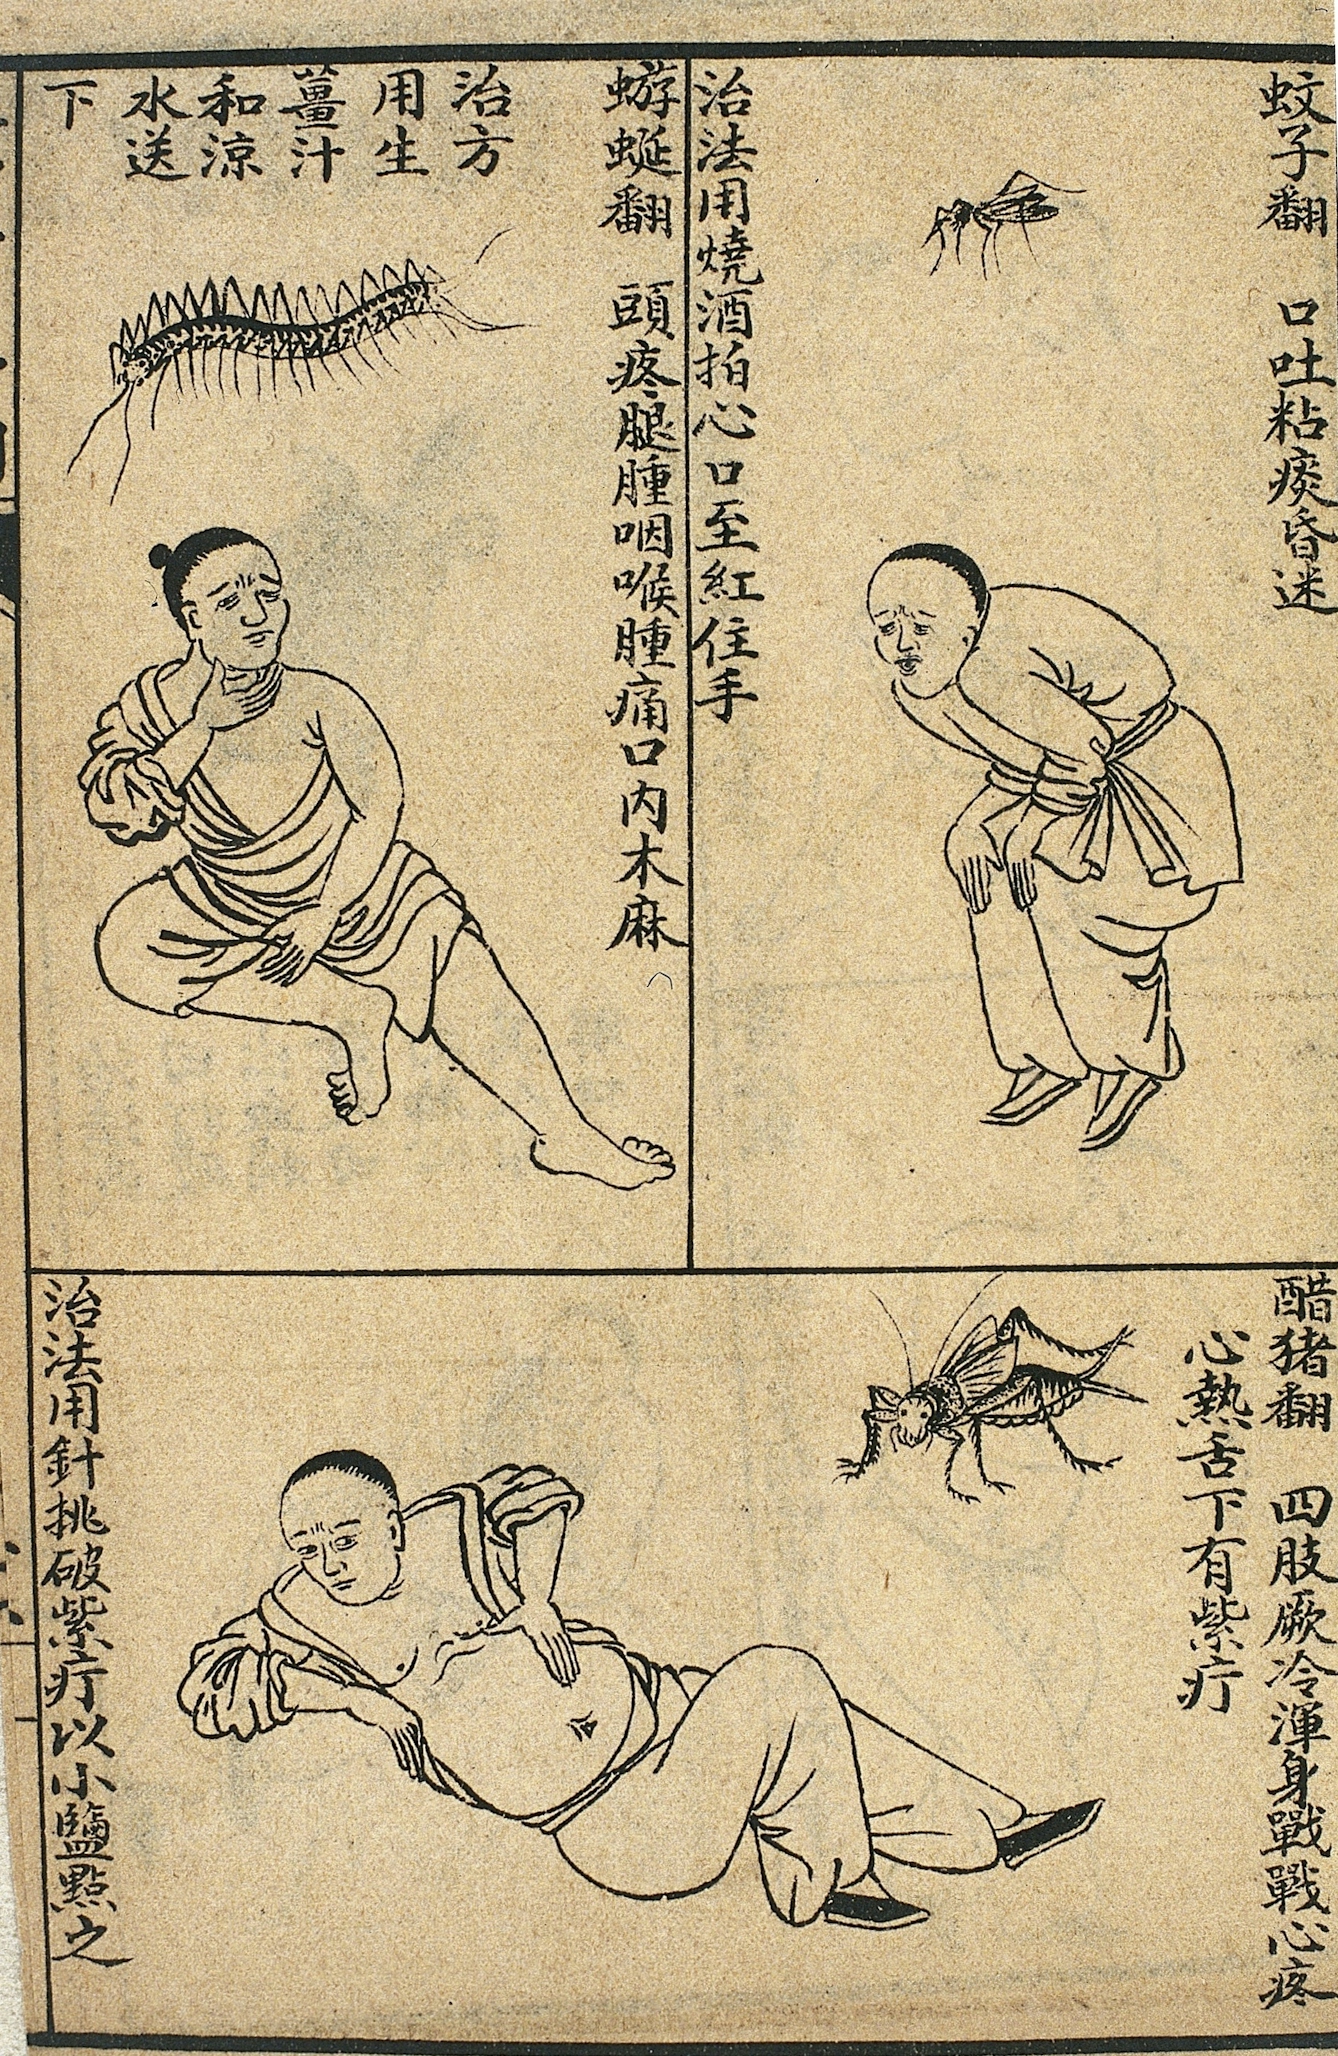 Early C20 Chinese Lithograph: 'Fan' diseases. Top left is a man clutching his throat and stomach with a millipede above him. Top right is a man doubled over with a mosquito above him. Bottom is a man reclined with his hand on his stomach with some sort of fly above him. All surrounded by Chinese characters.